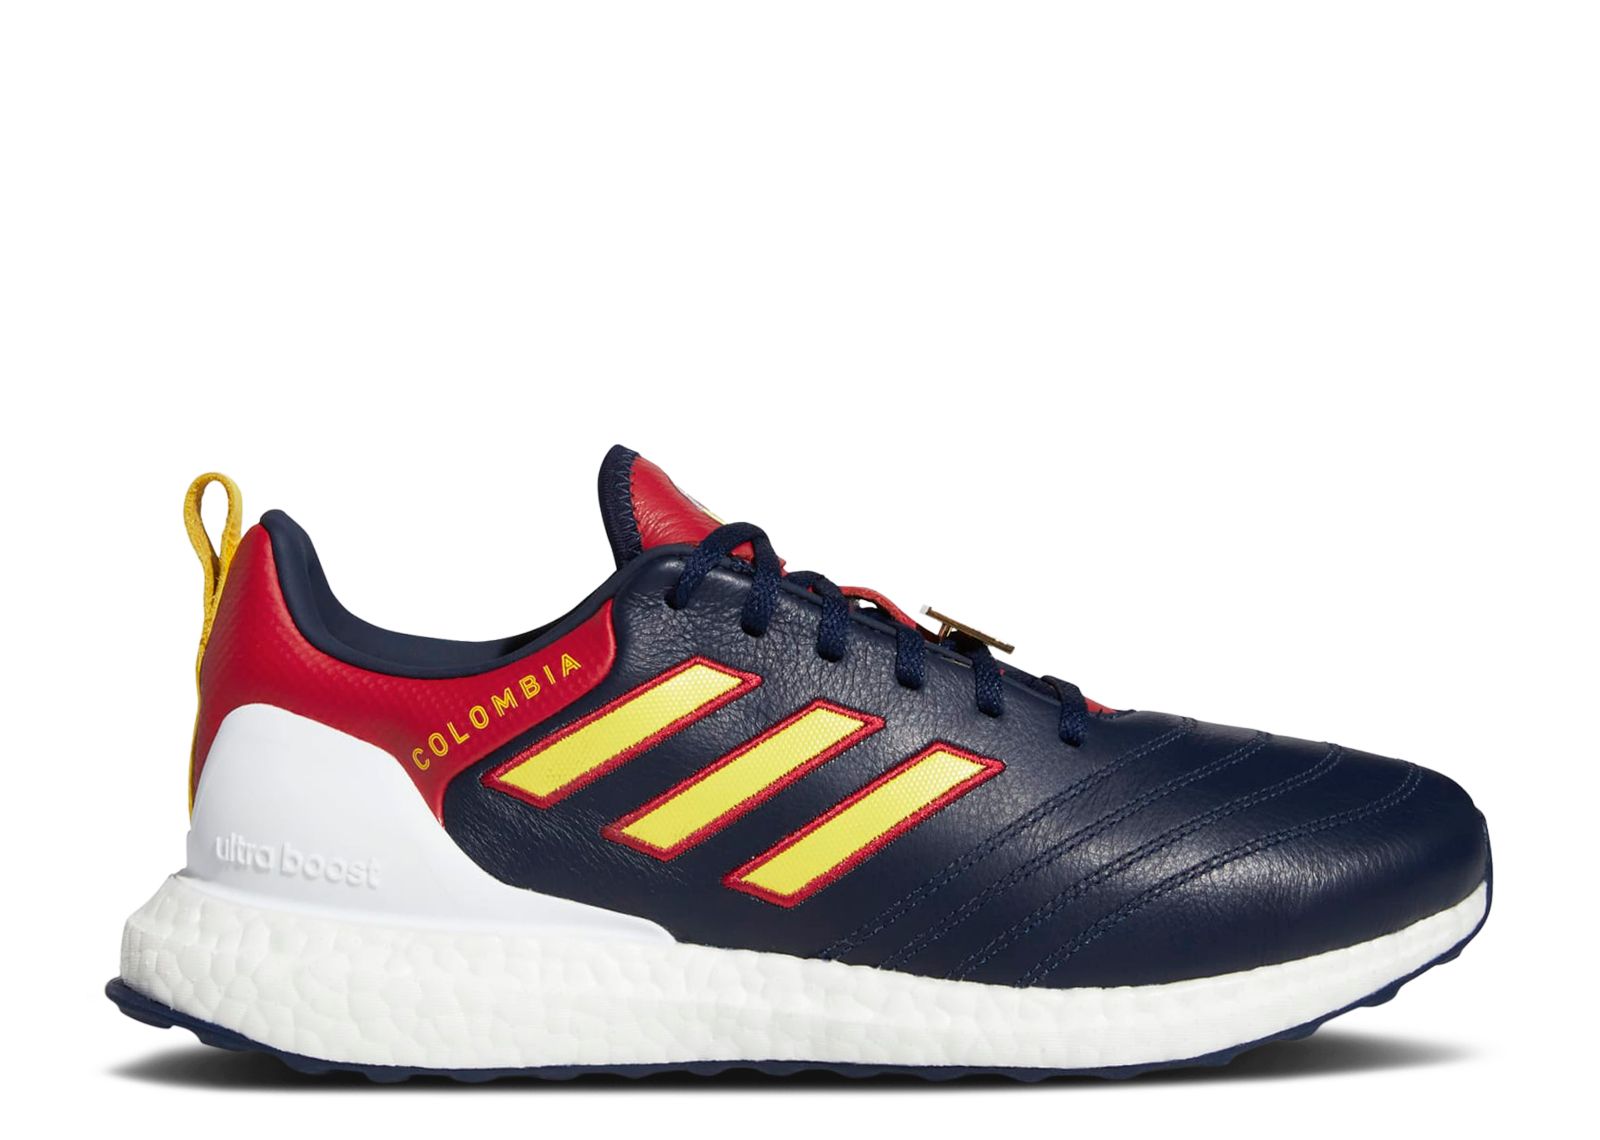 UltraBoost DNA Cup Colombia' - Adidas - GW7271 - collegiate navy/bright power red | Flight Club